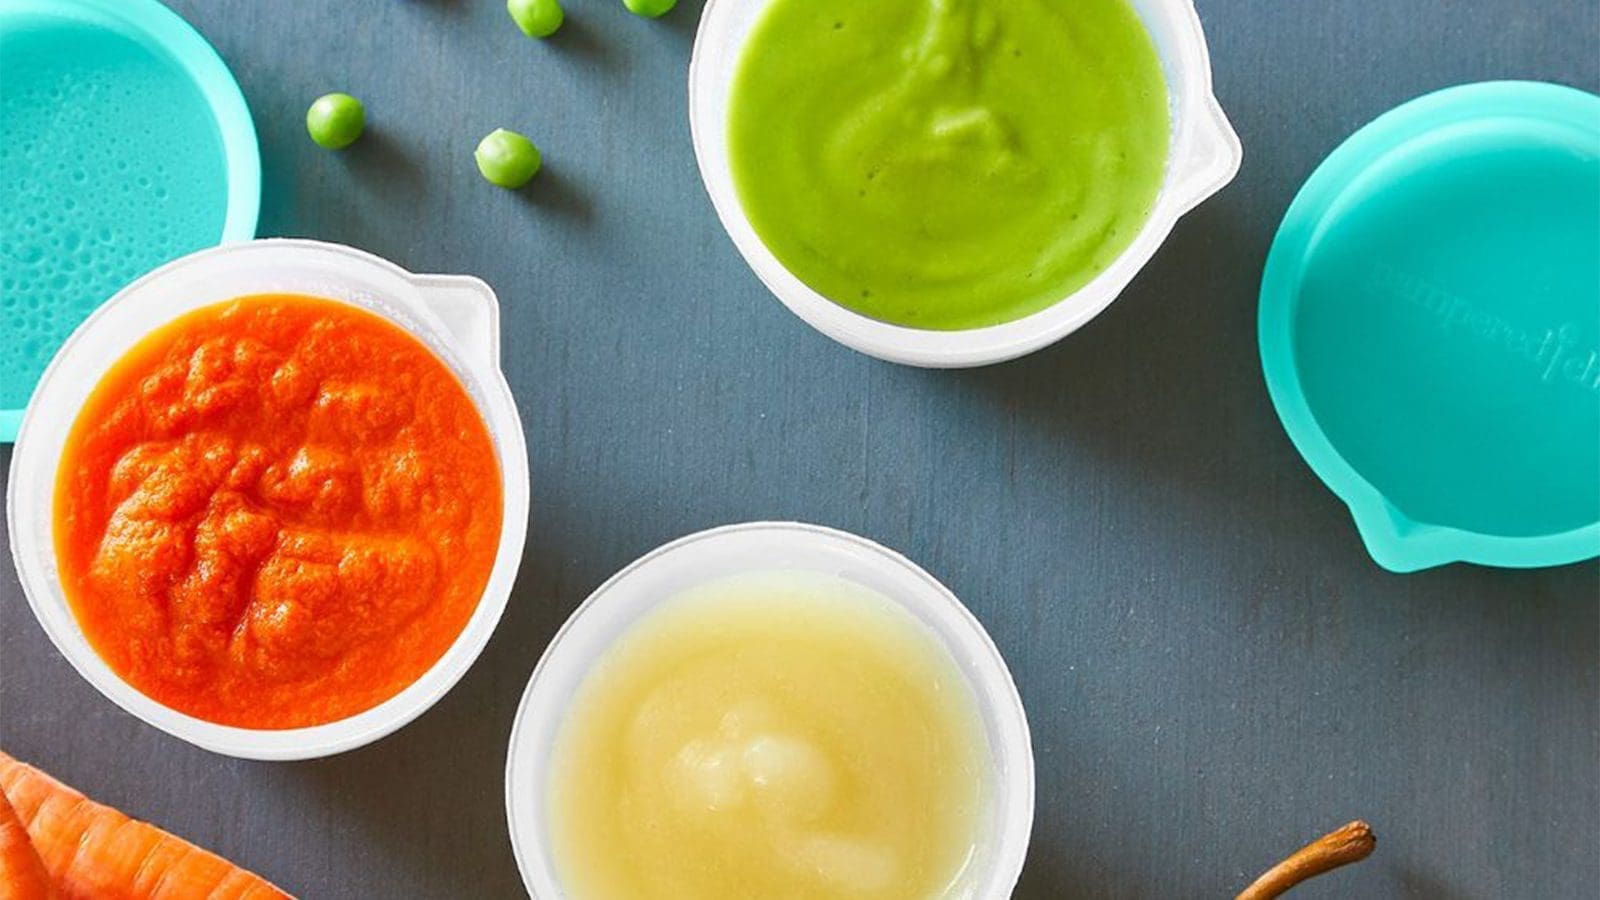 California’s new law mandates rigorous testing for toxic heavy metals in baby food